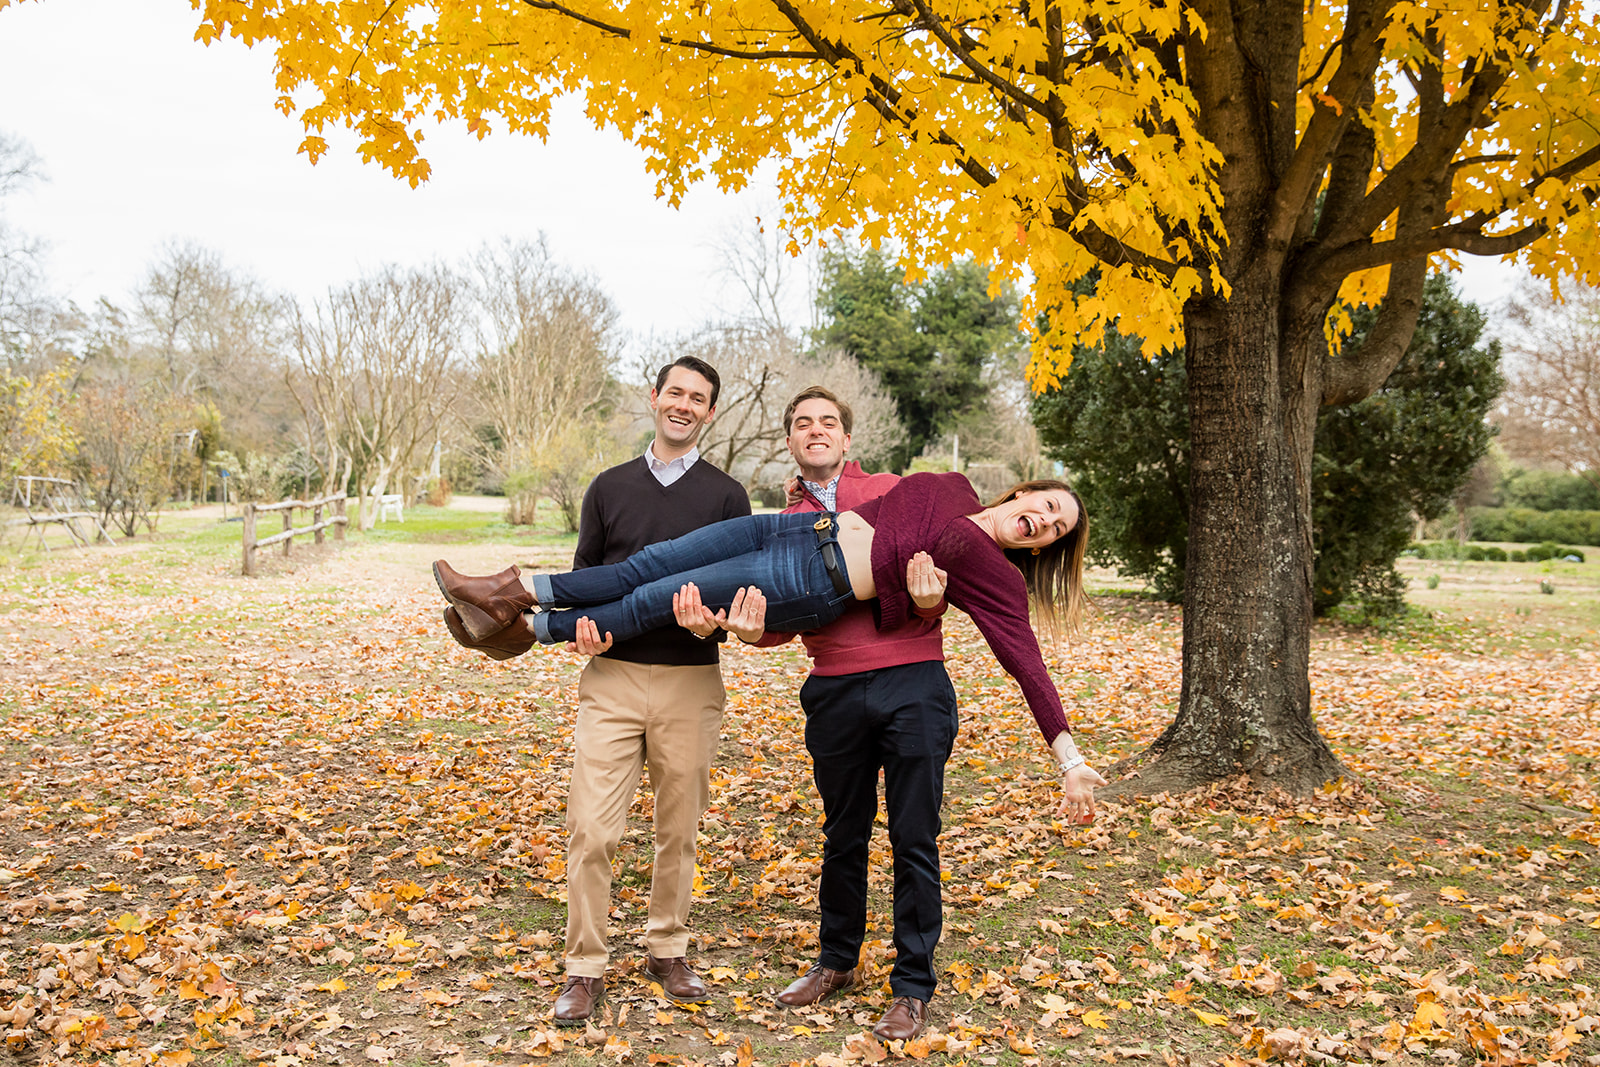 Large Fall Family Photo Shoot With Adult Children at Tuckahoe Plantation - Image Property of www.j-dphoto.com